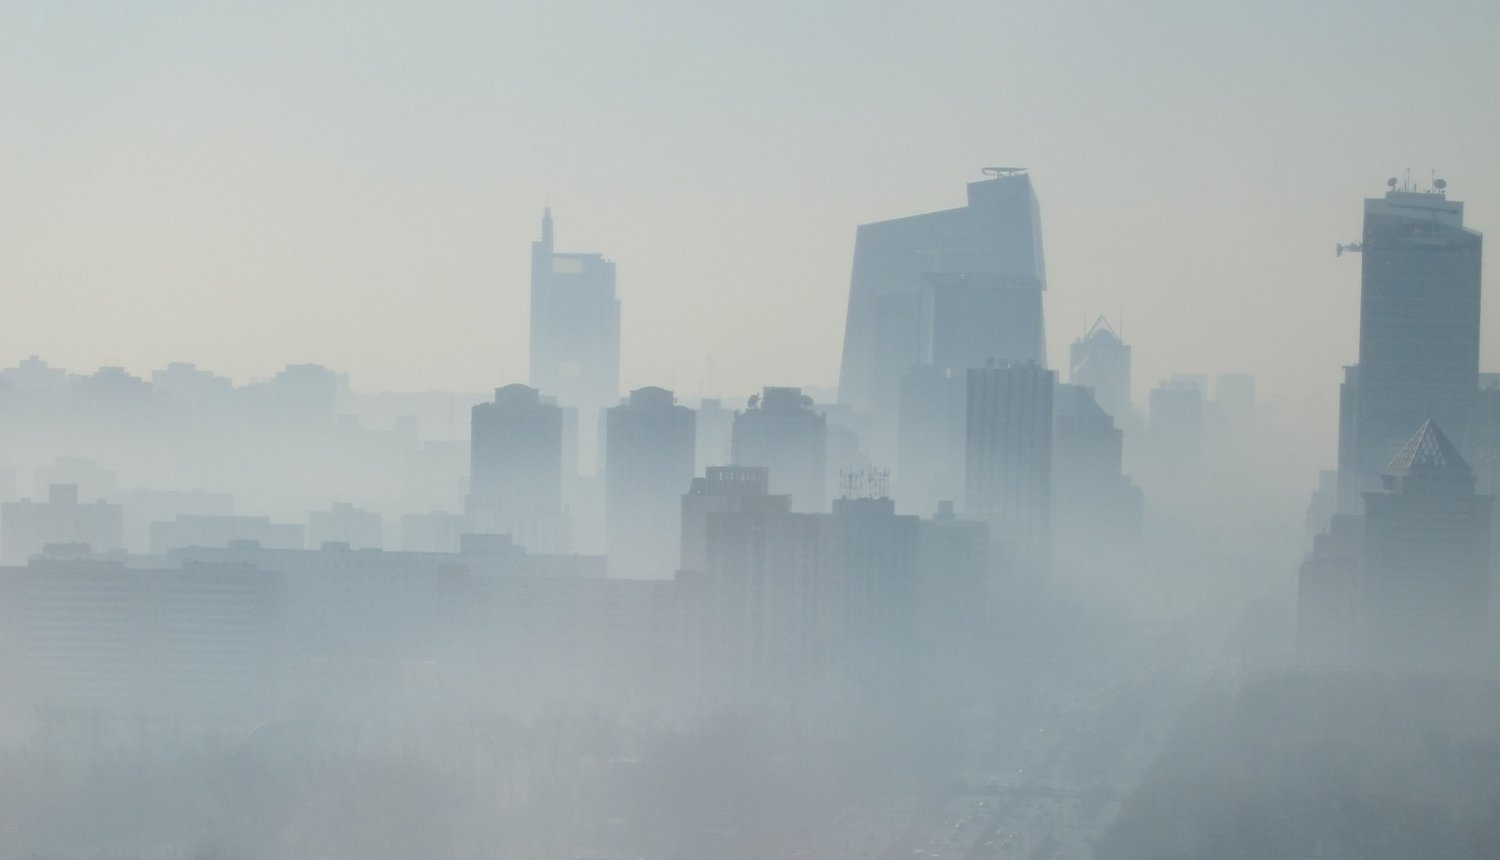 Beicology: Airpocalypse, Done? Not So Fast, Say Experts